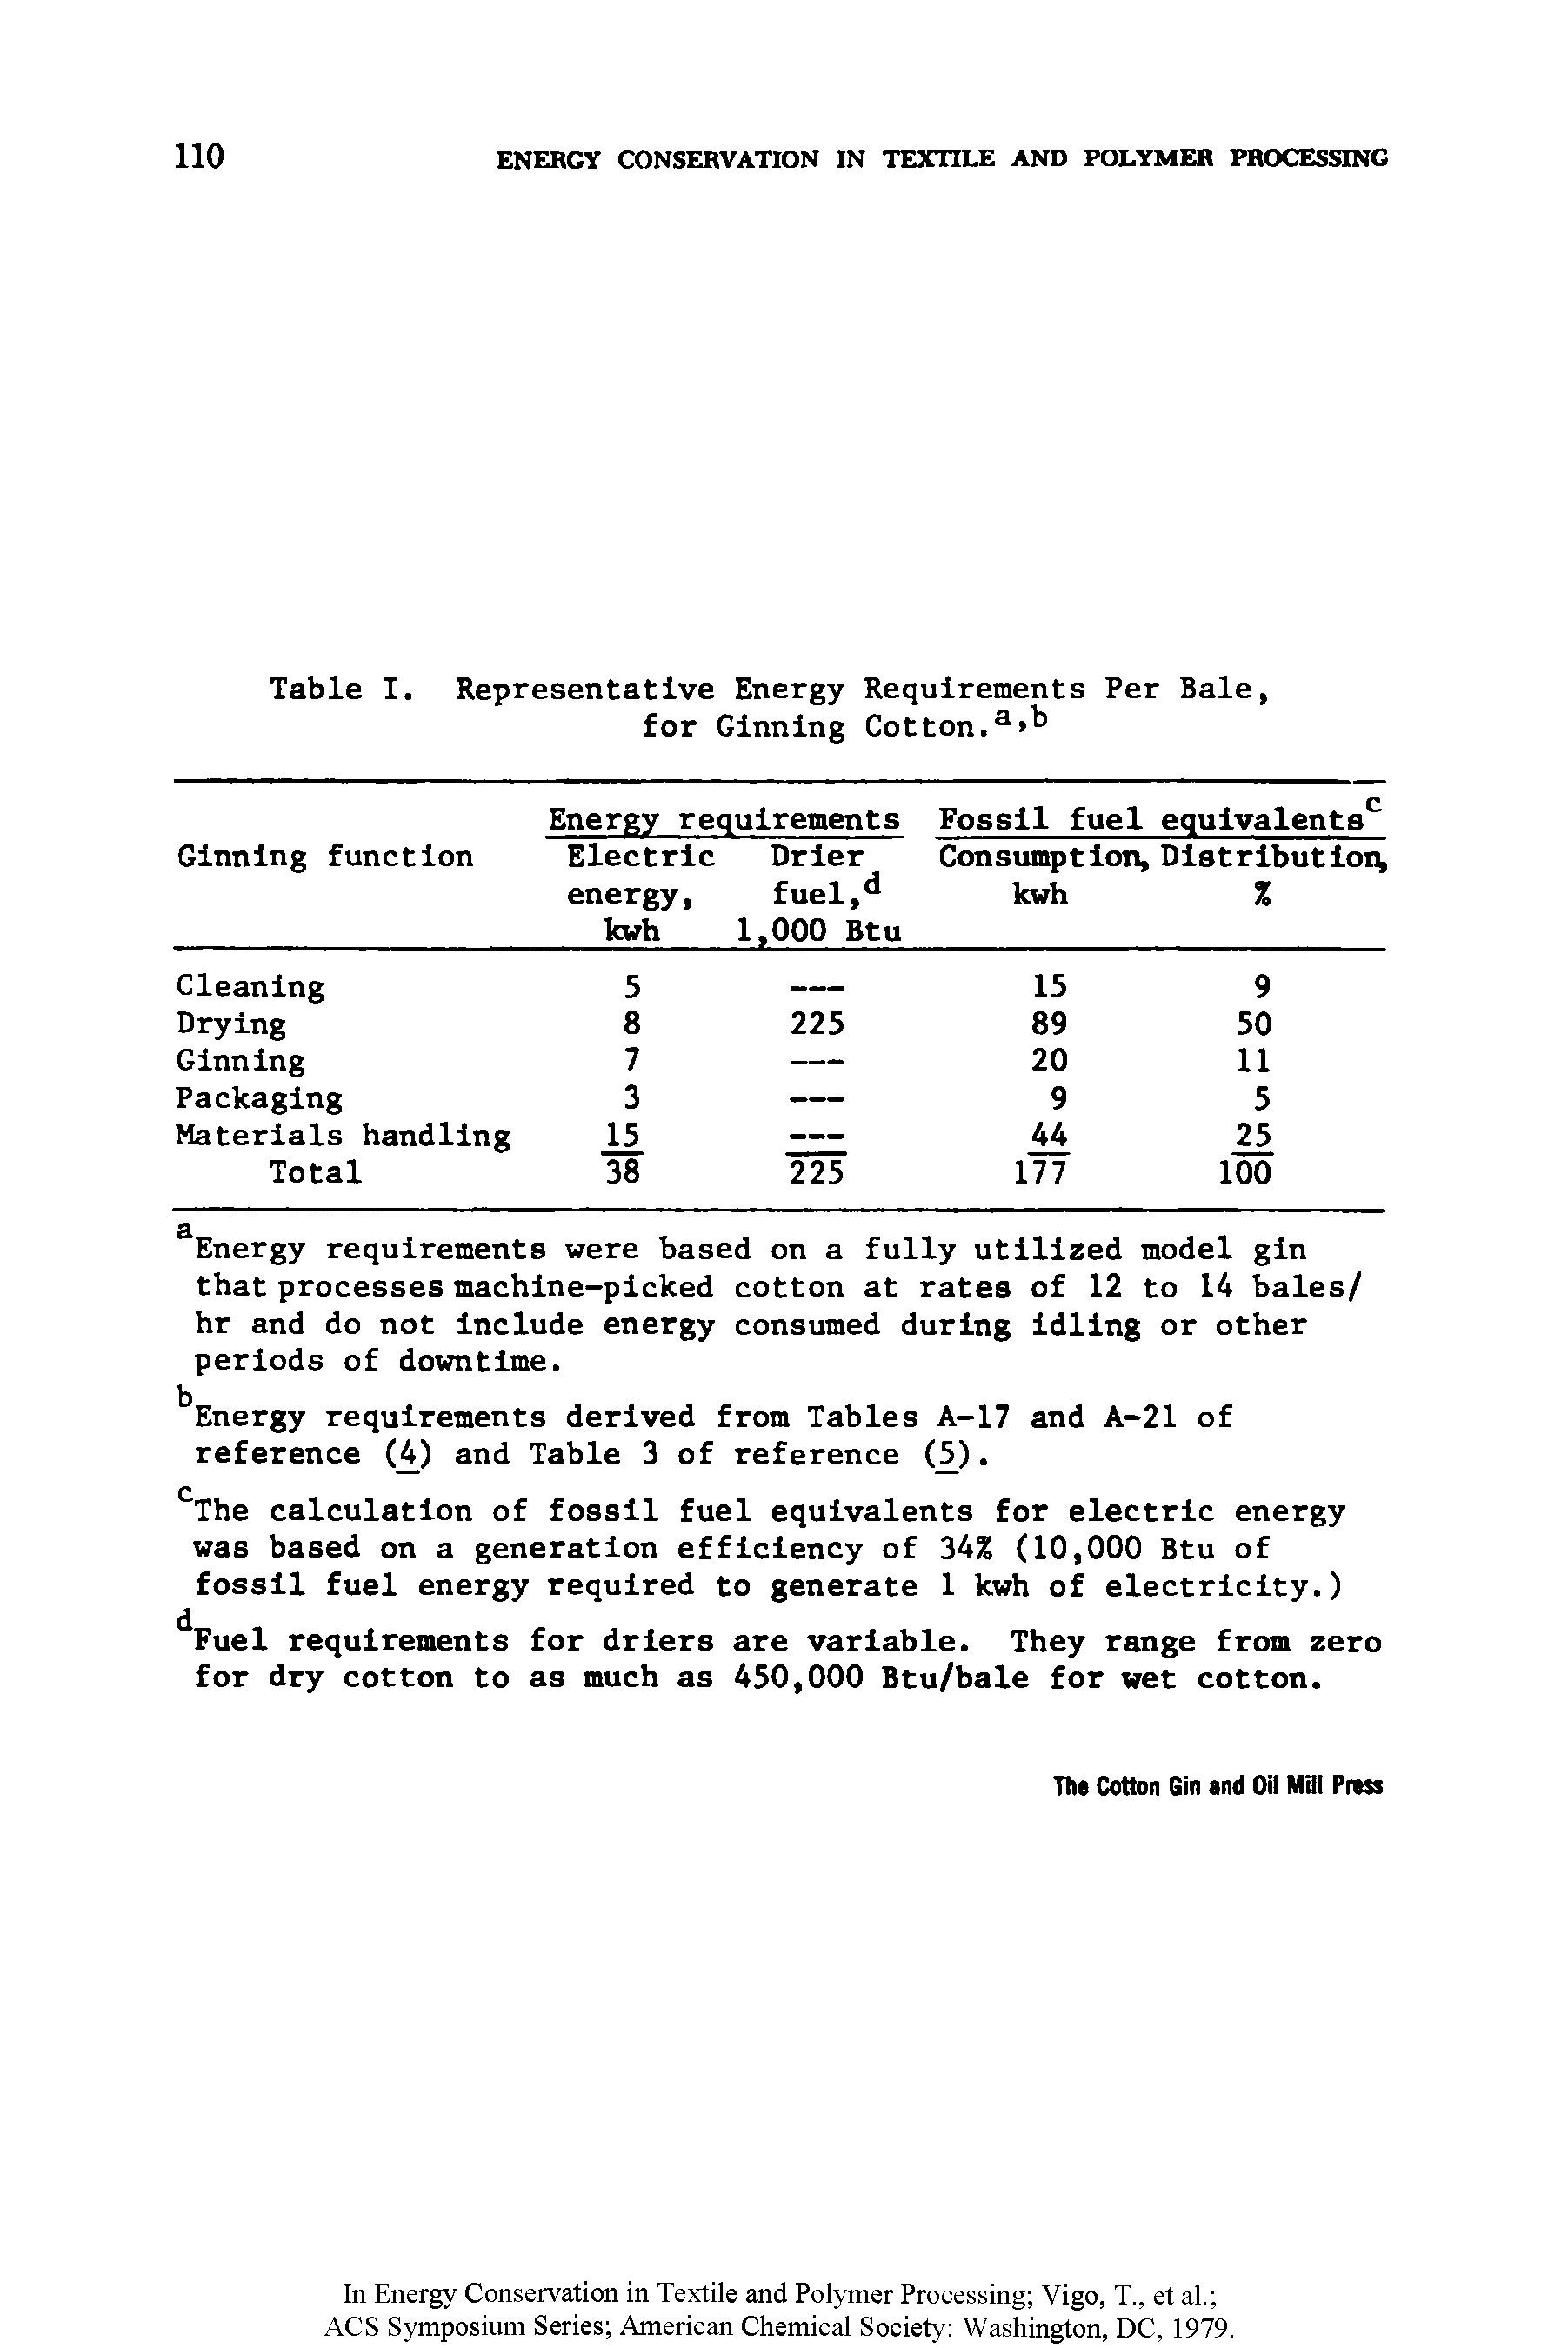 Table I. Representative Energy Requirements Per Bale, for Ginning Cotton.a b...